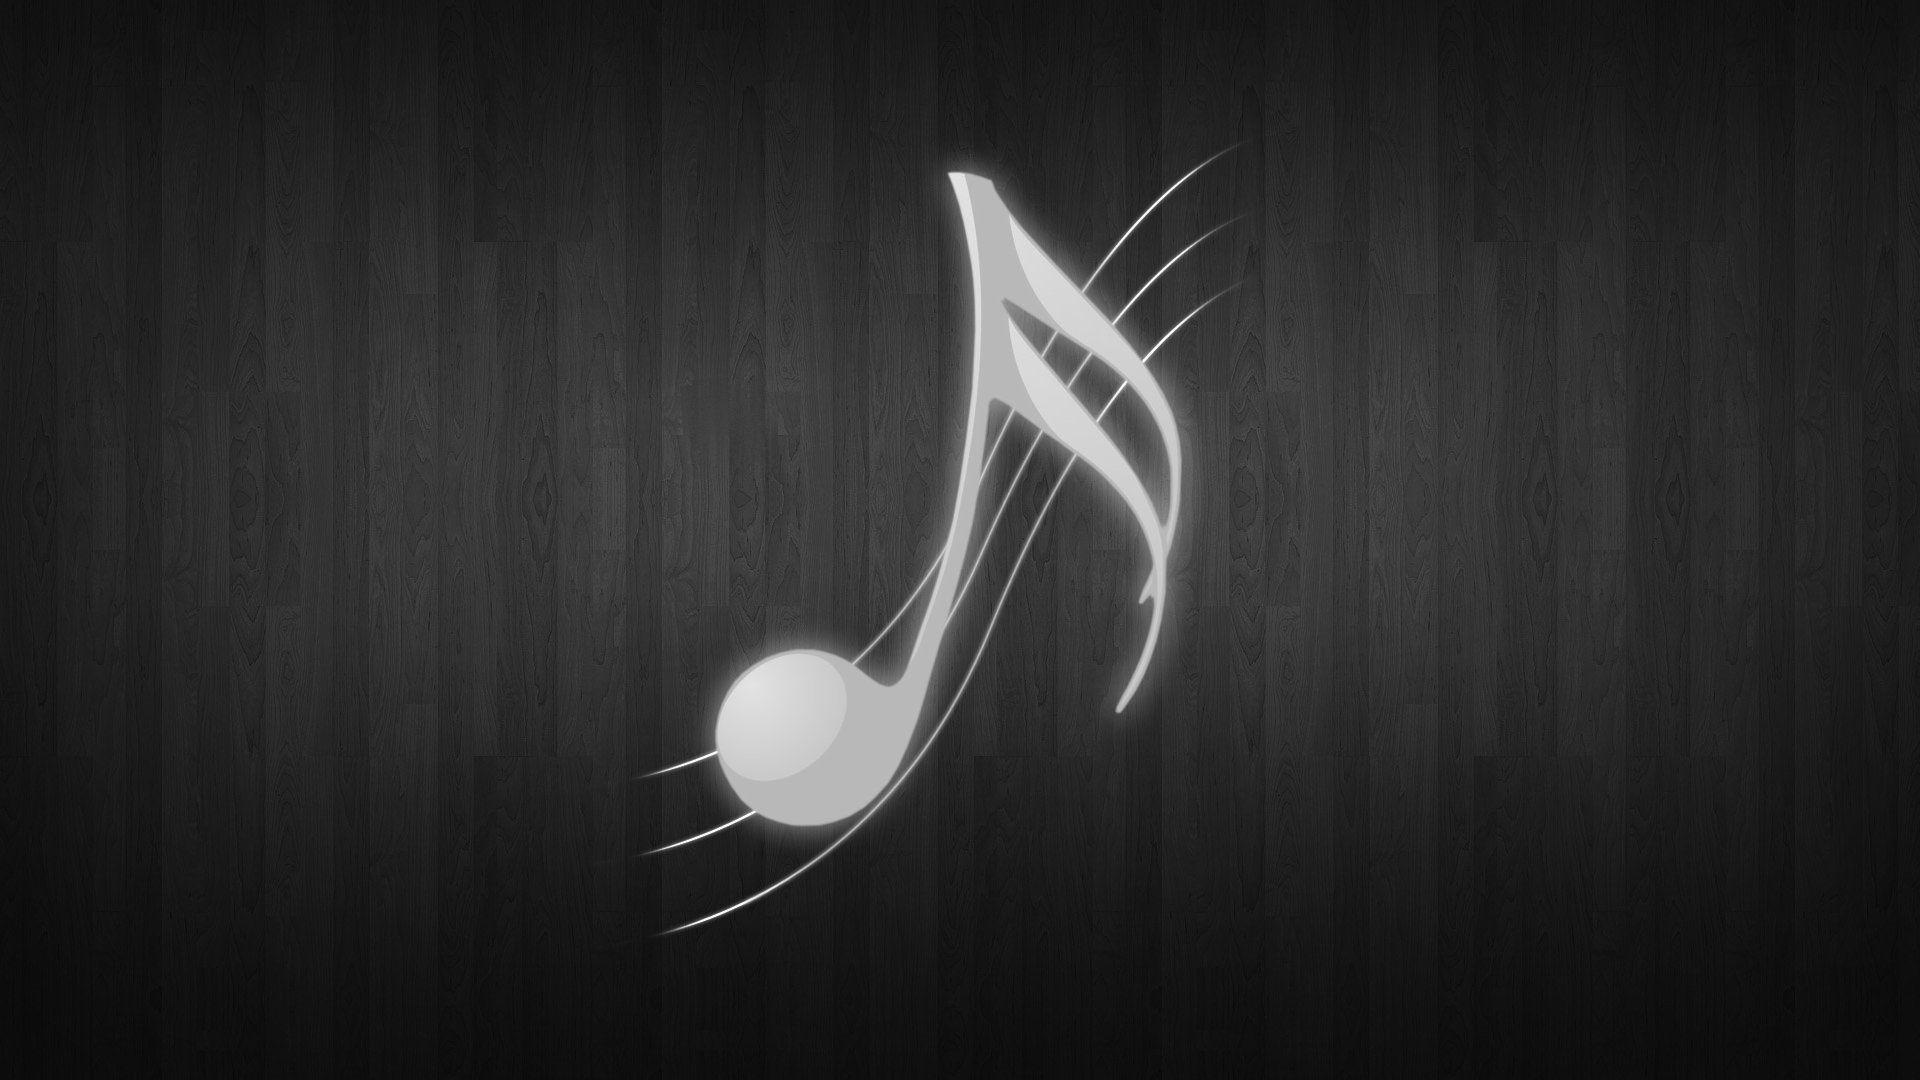 Wallpaper For > Music Notes Wallpaper For iPhone